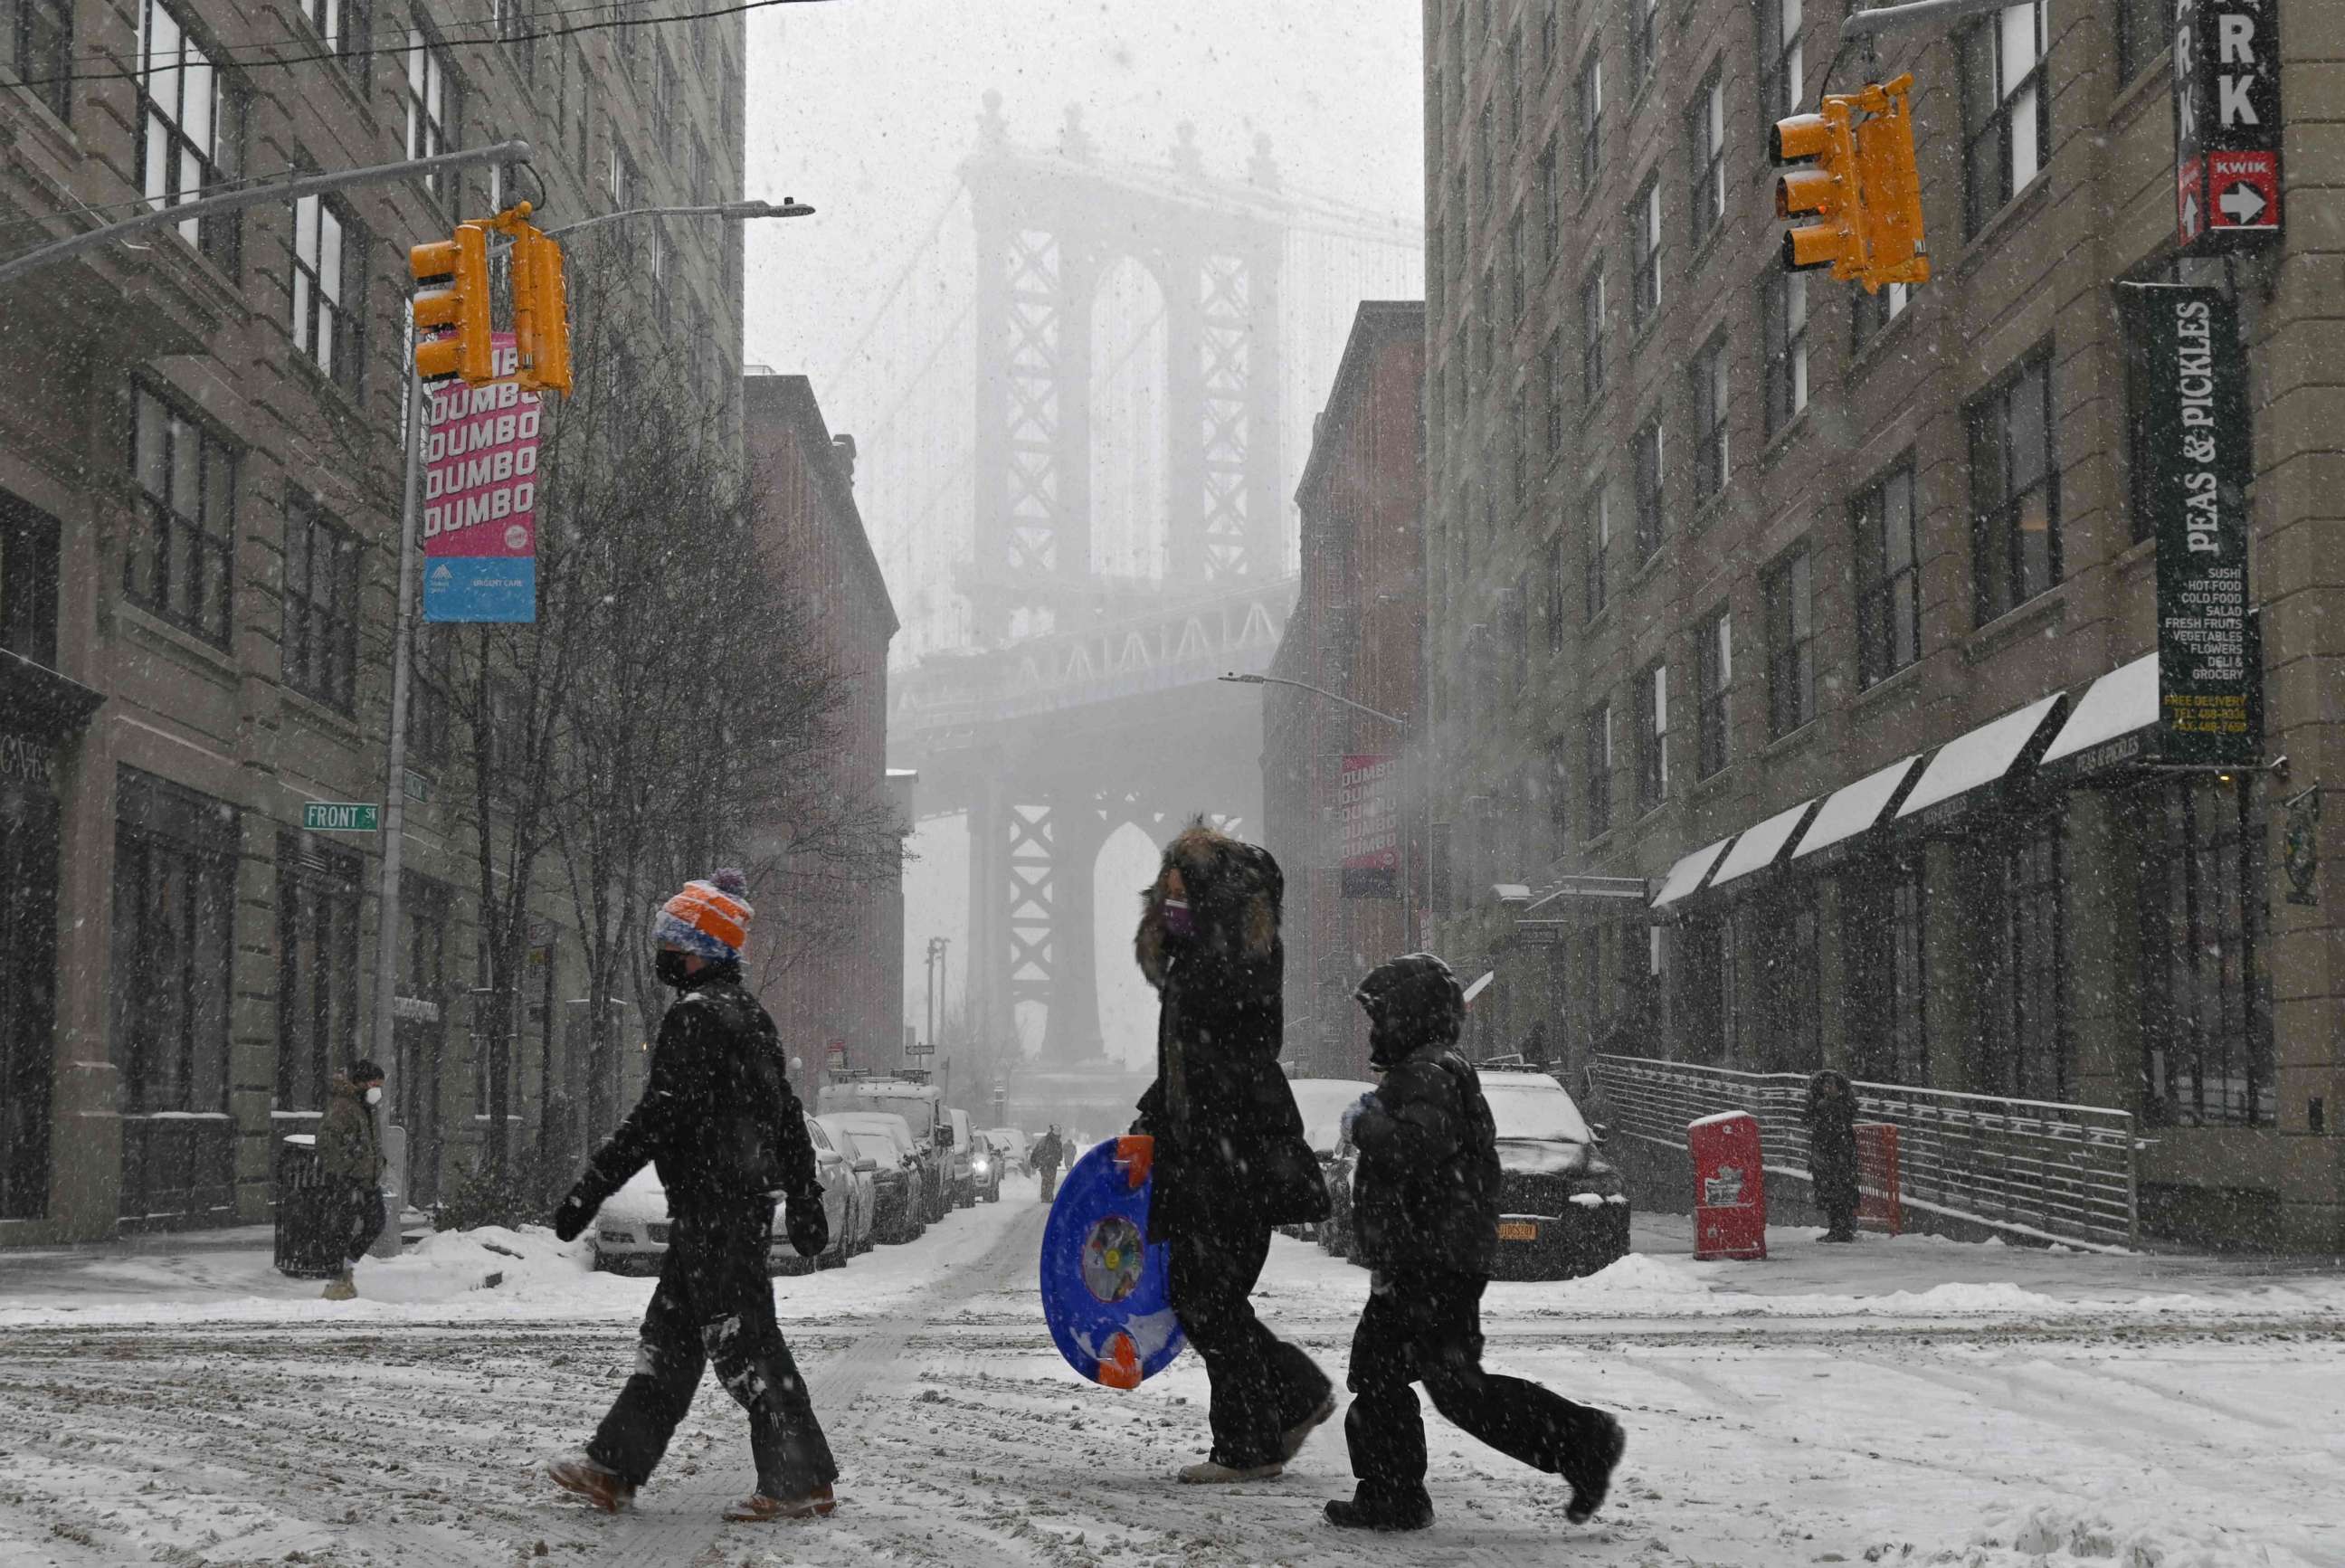 PHOTO: TOPSHOT - People walk through the snow in New York, on Feb. 18, 2021, after a snowstorm.